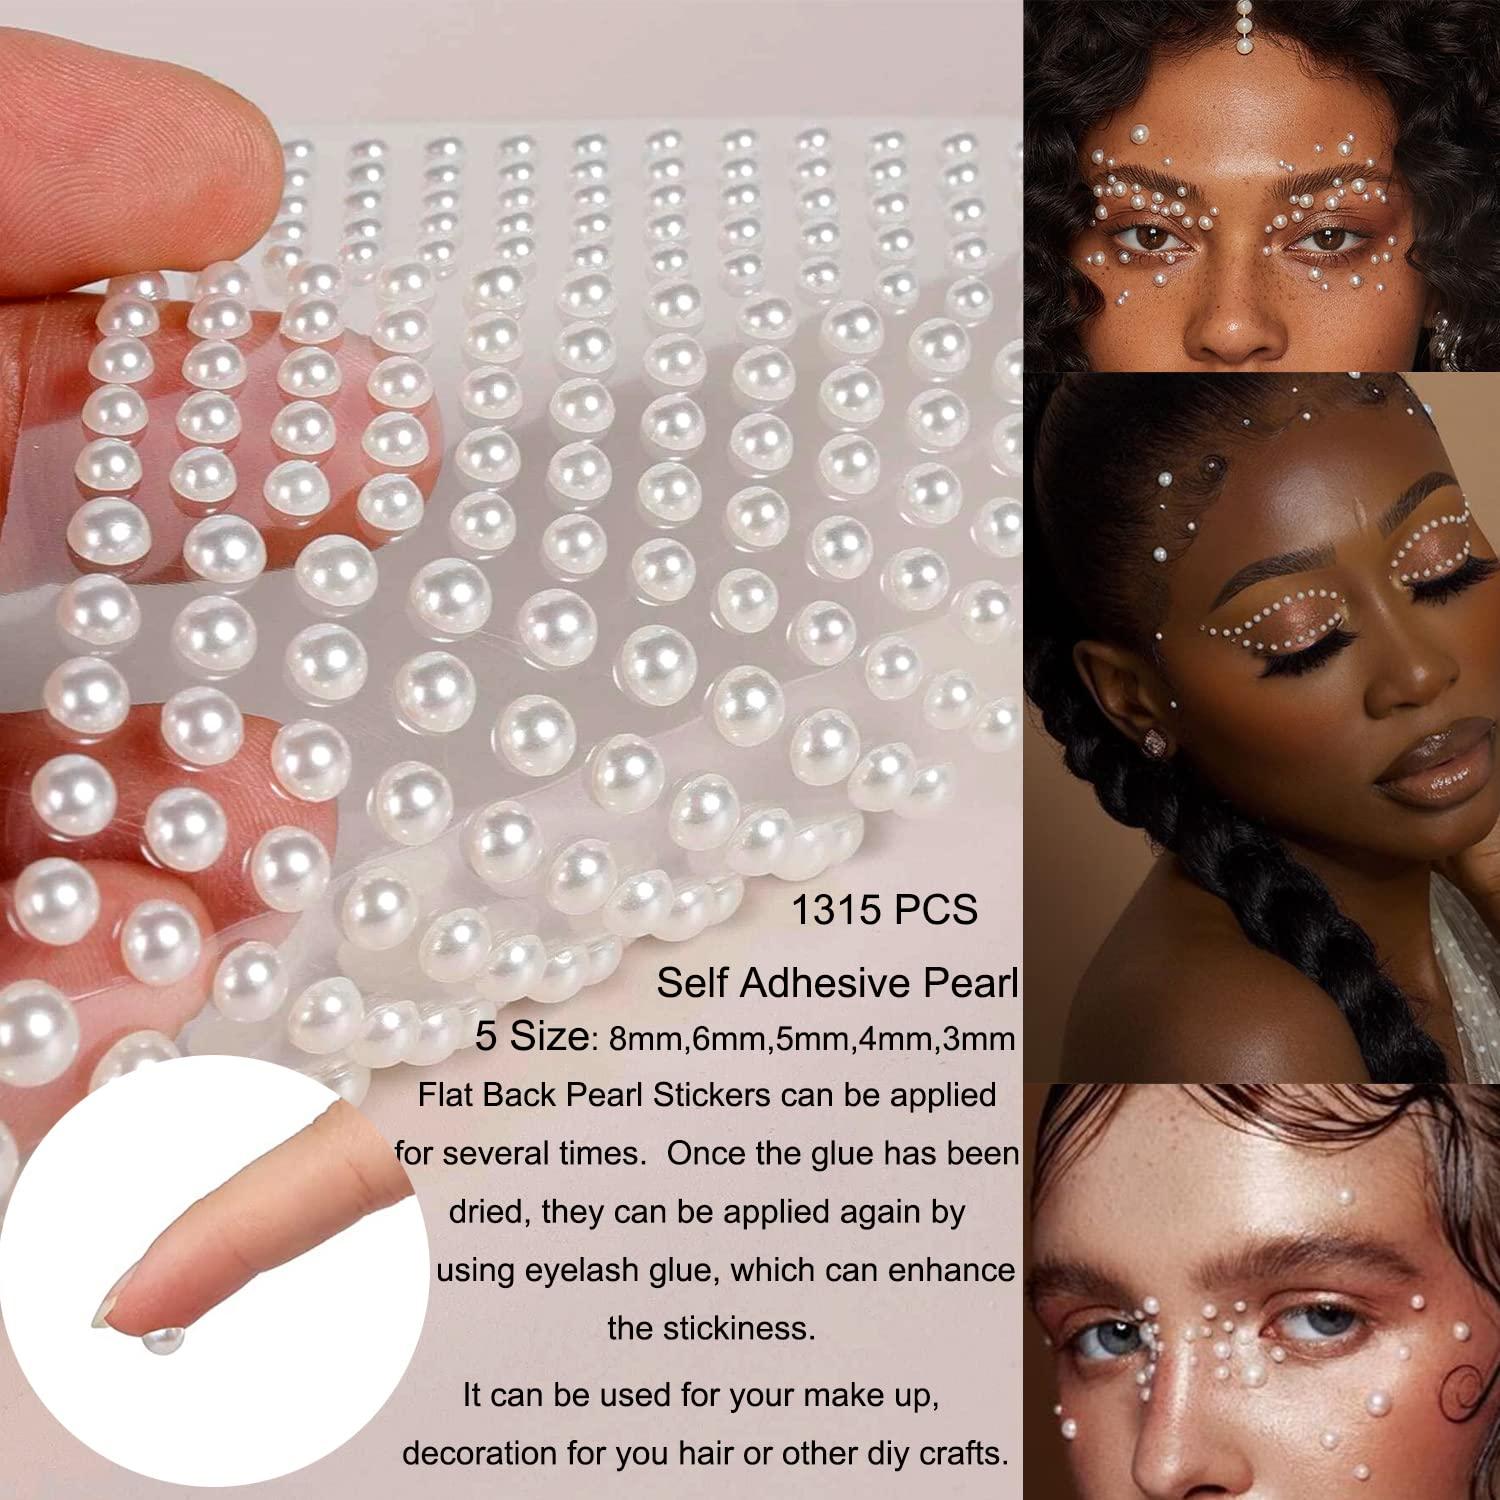 6mm Self Adhesive Pearls sheet of 100 Stick on Pearls Decorative